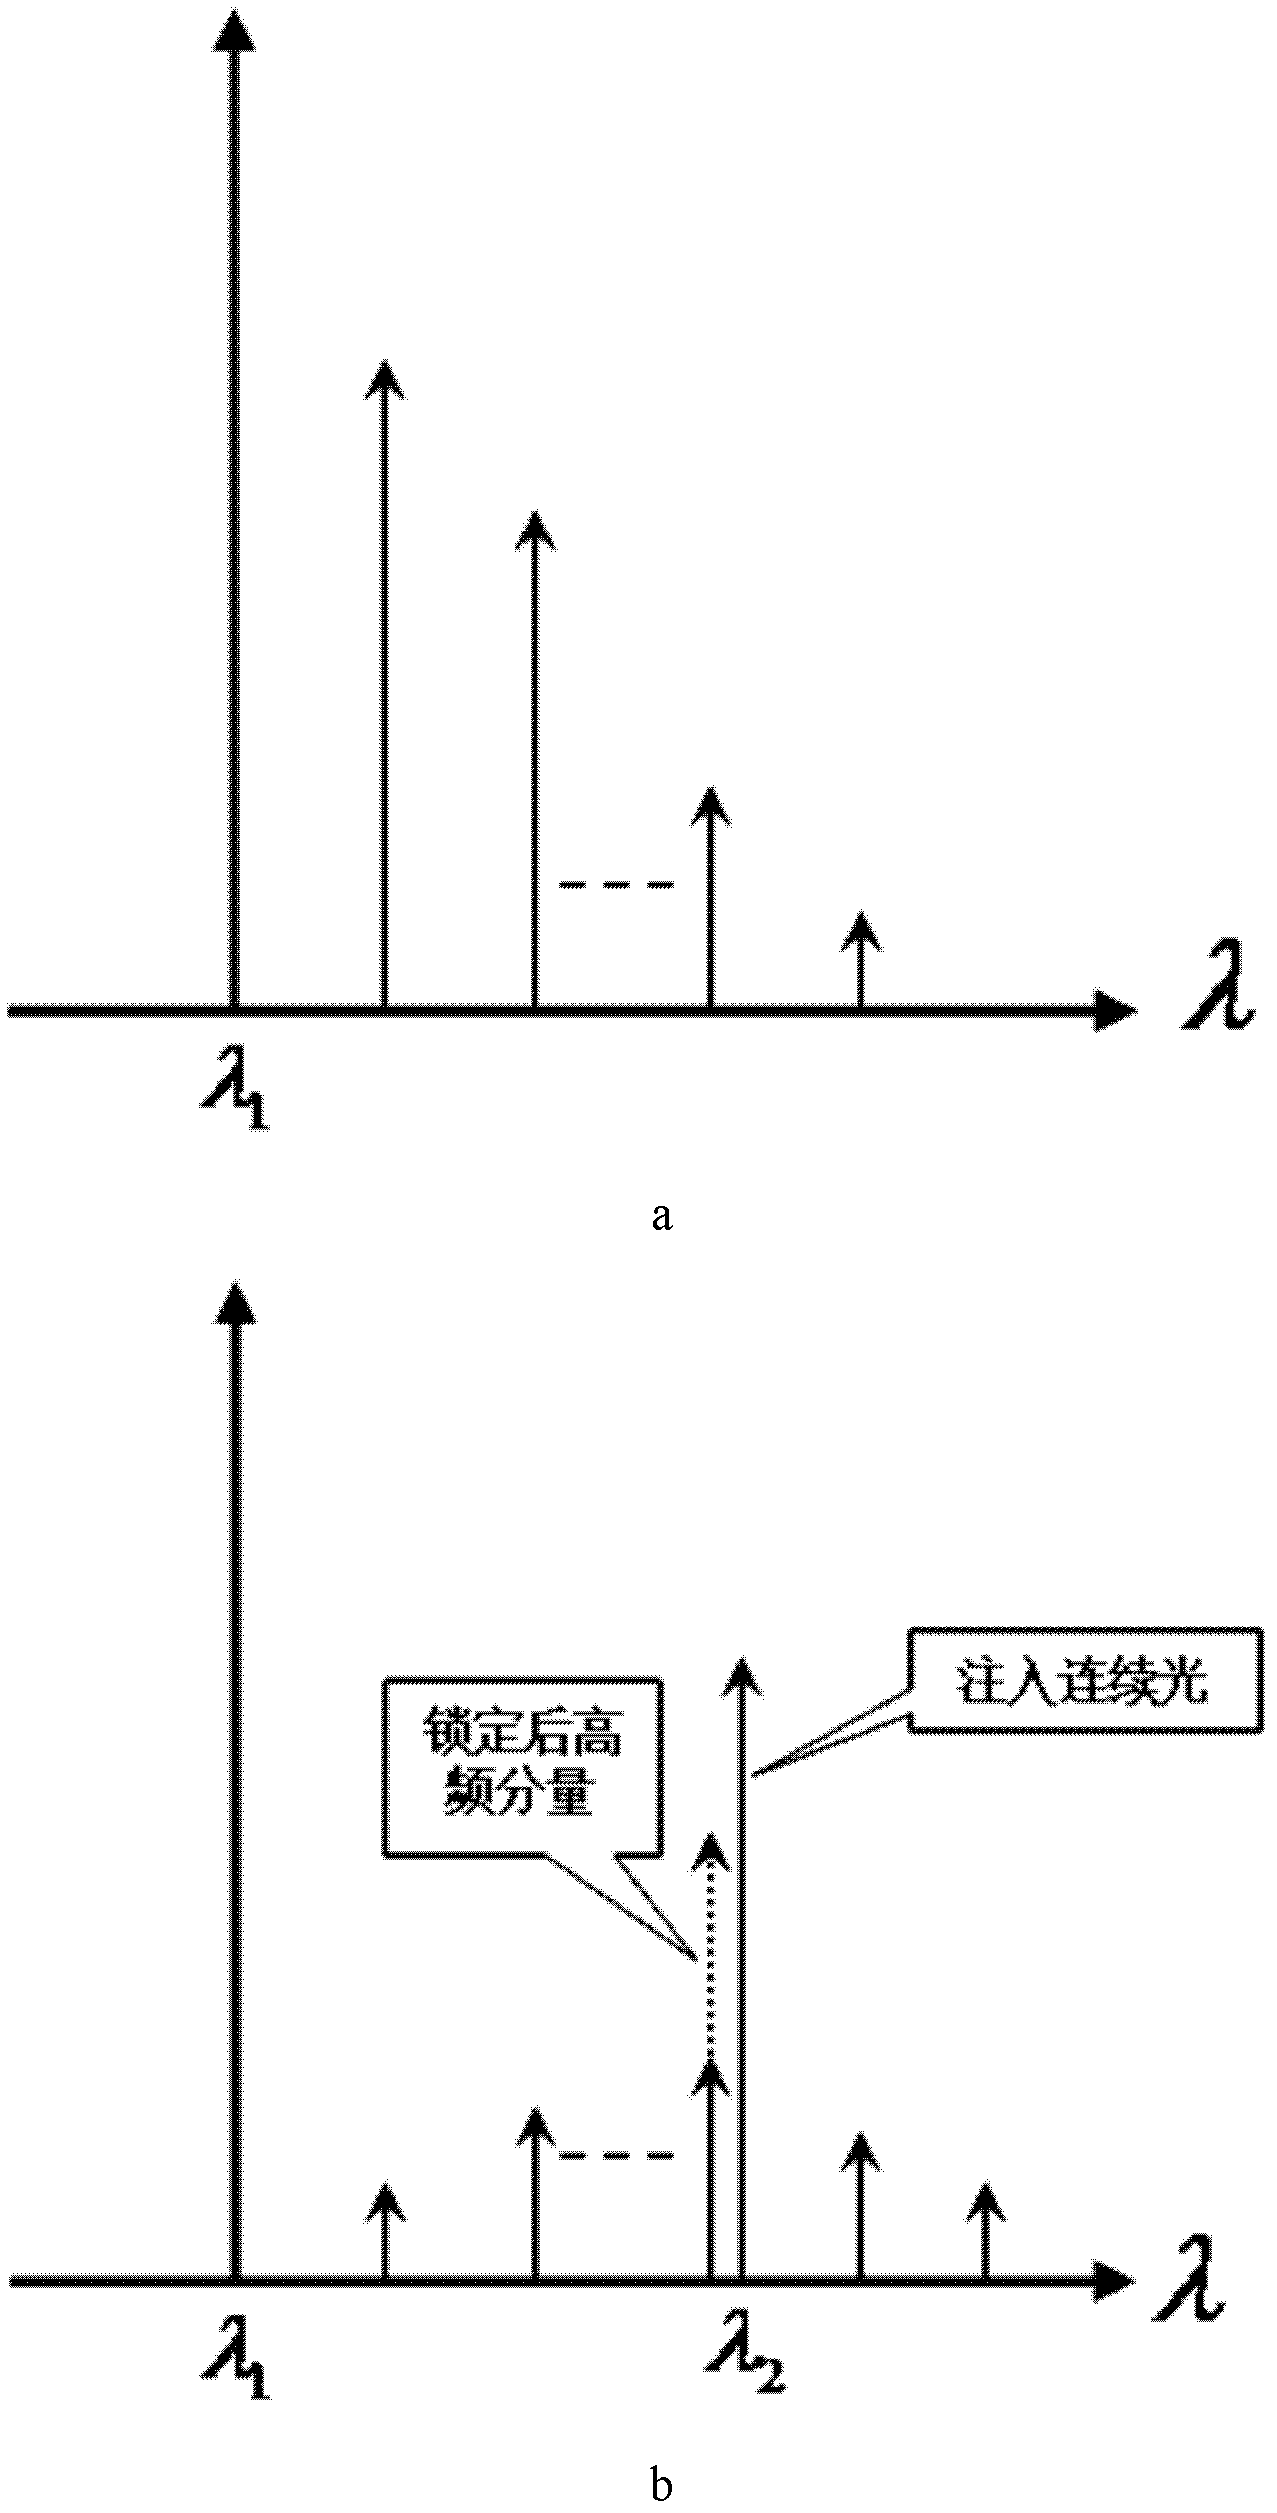 Production method of optical microwave signal with tunable broadband frequency